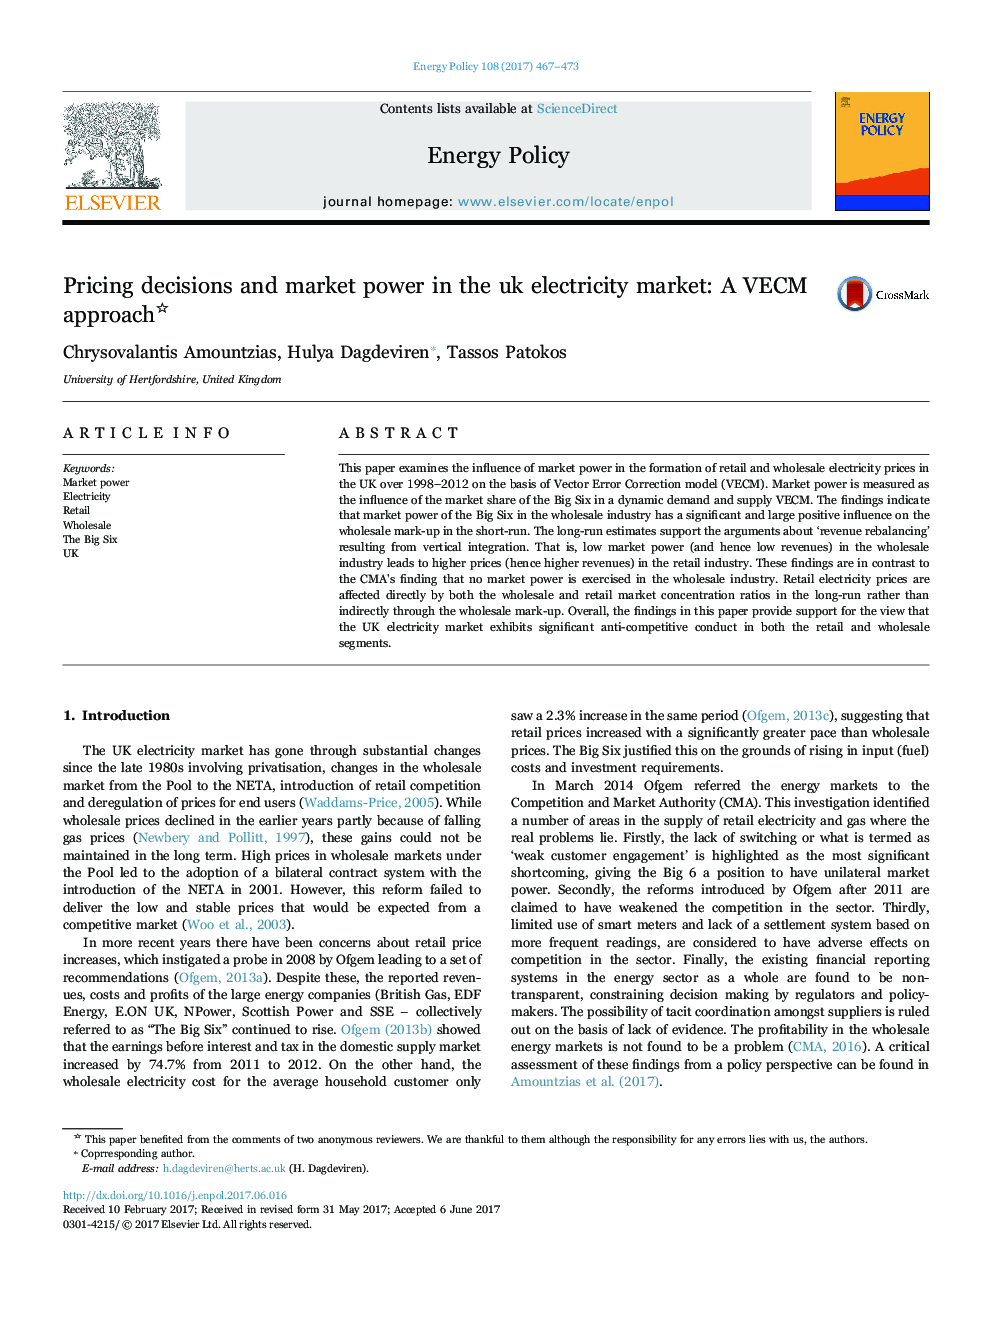 Pricing decisions and market power in the UK electricity market: A VECM approach